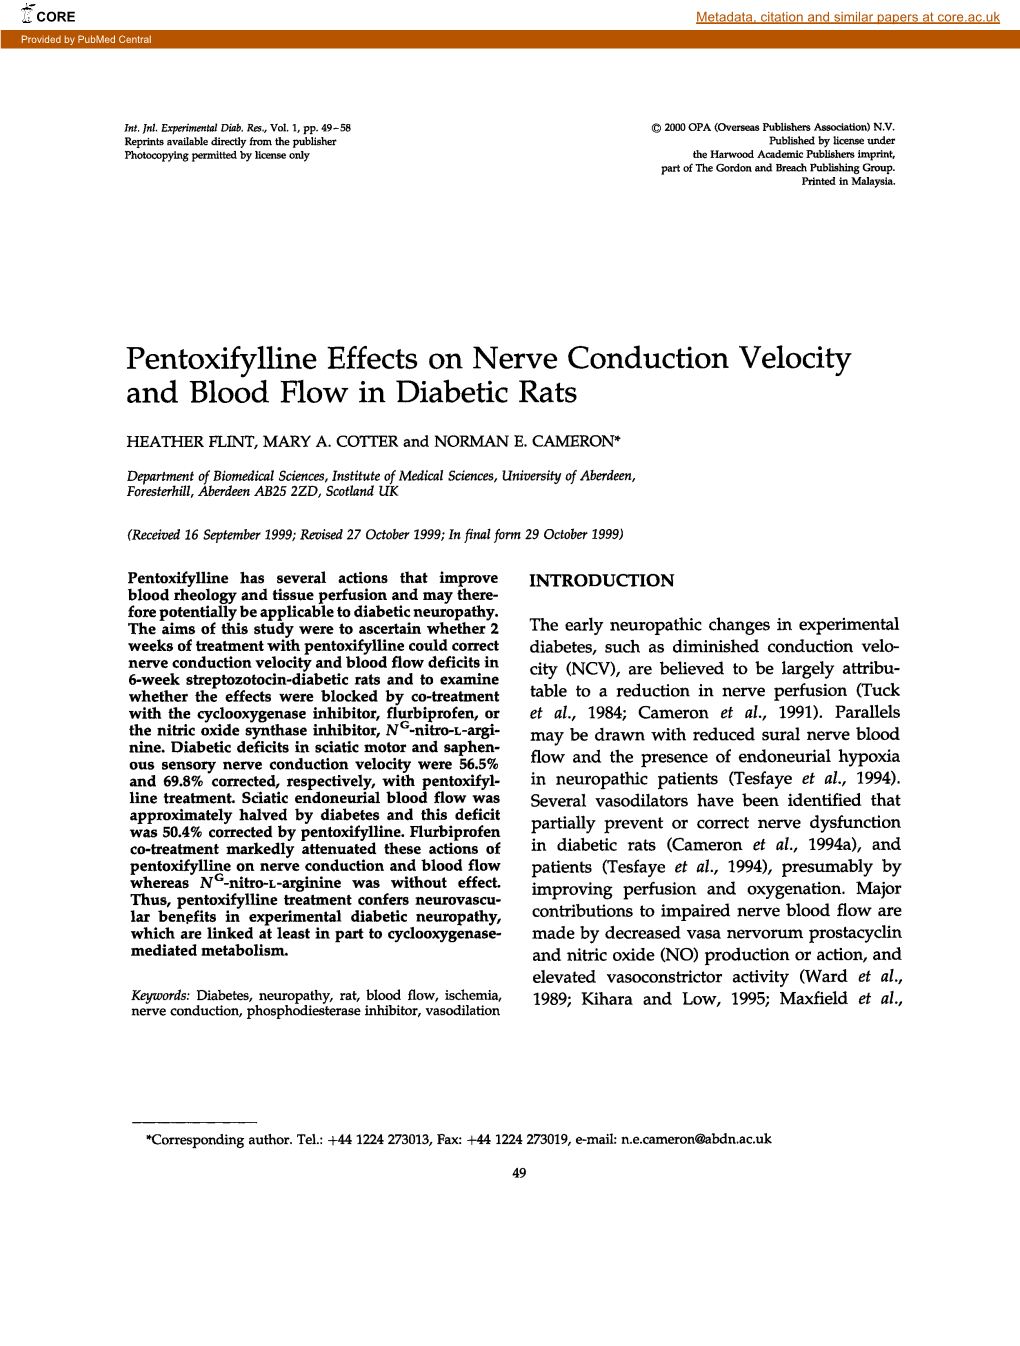 Pentoxifylline Effects on Nerve Conduction Velocity and Blood Flow in Diabetic Rats